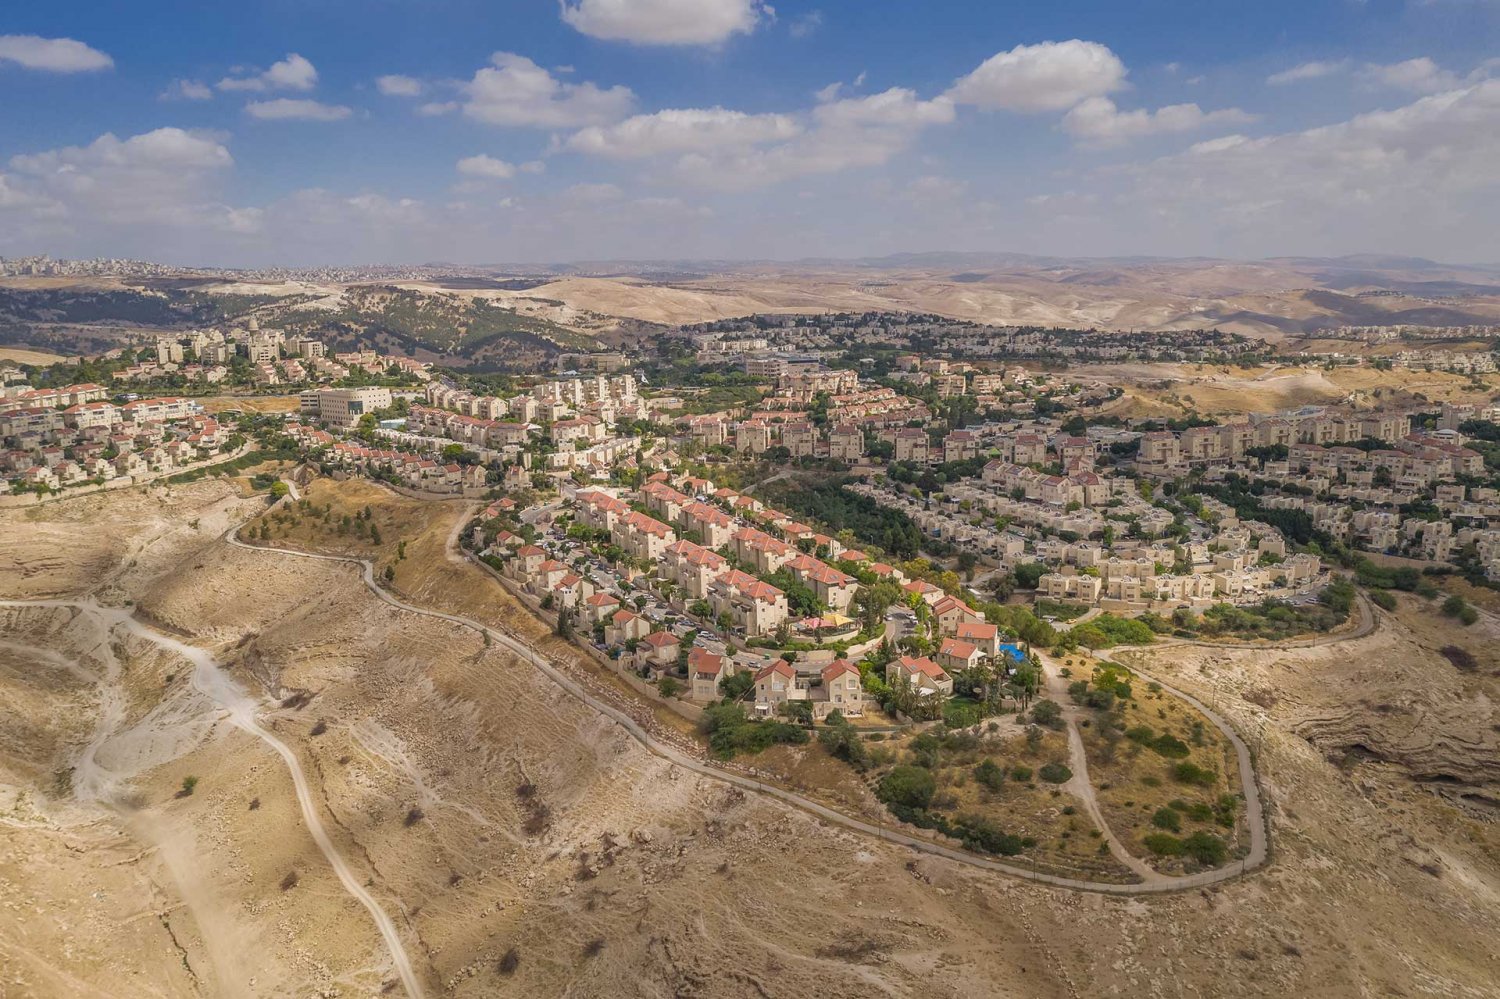 An aerial view of Ma‘ale Adumim settlement, the first major suburban settlement in the occupied West Bank